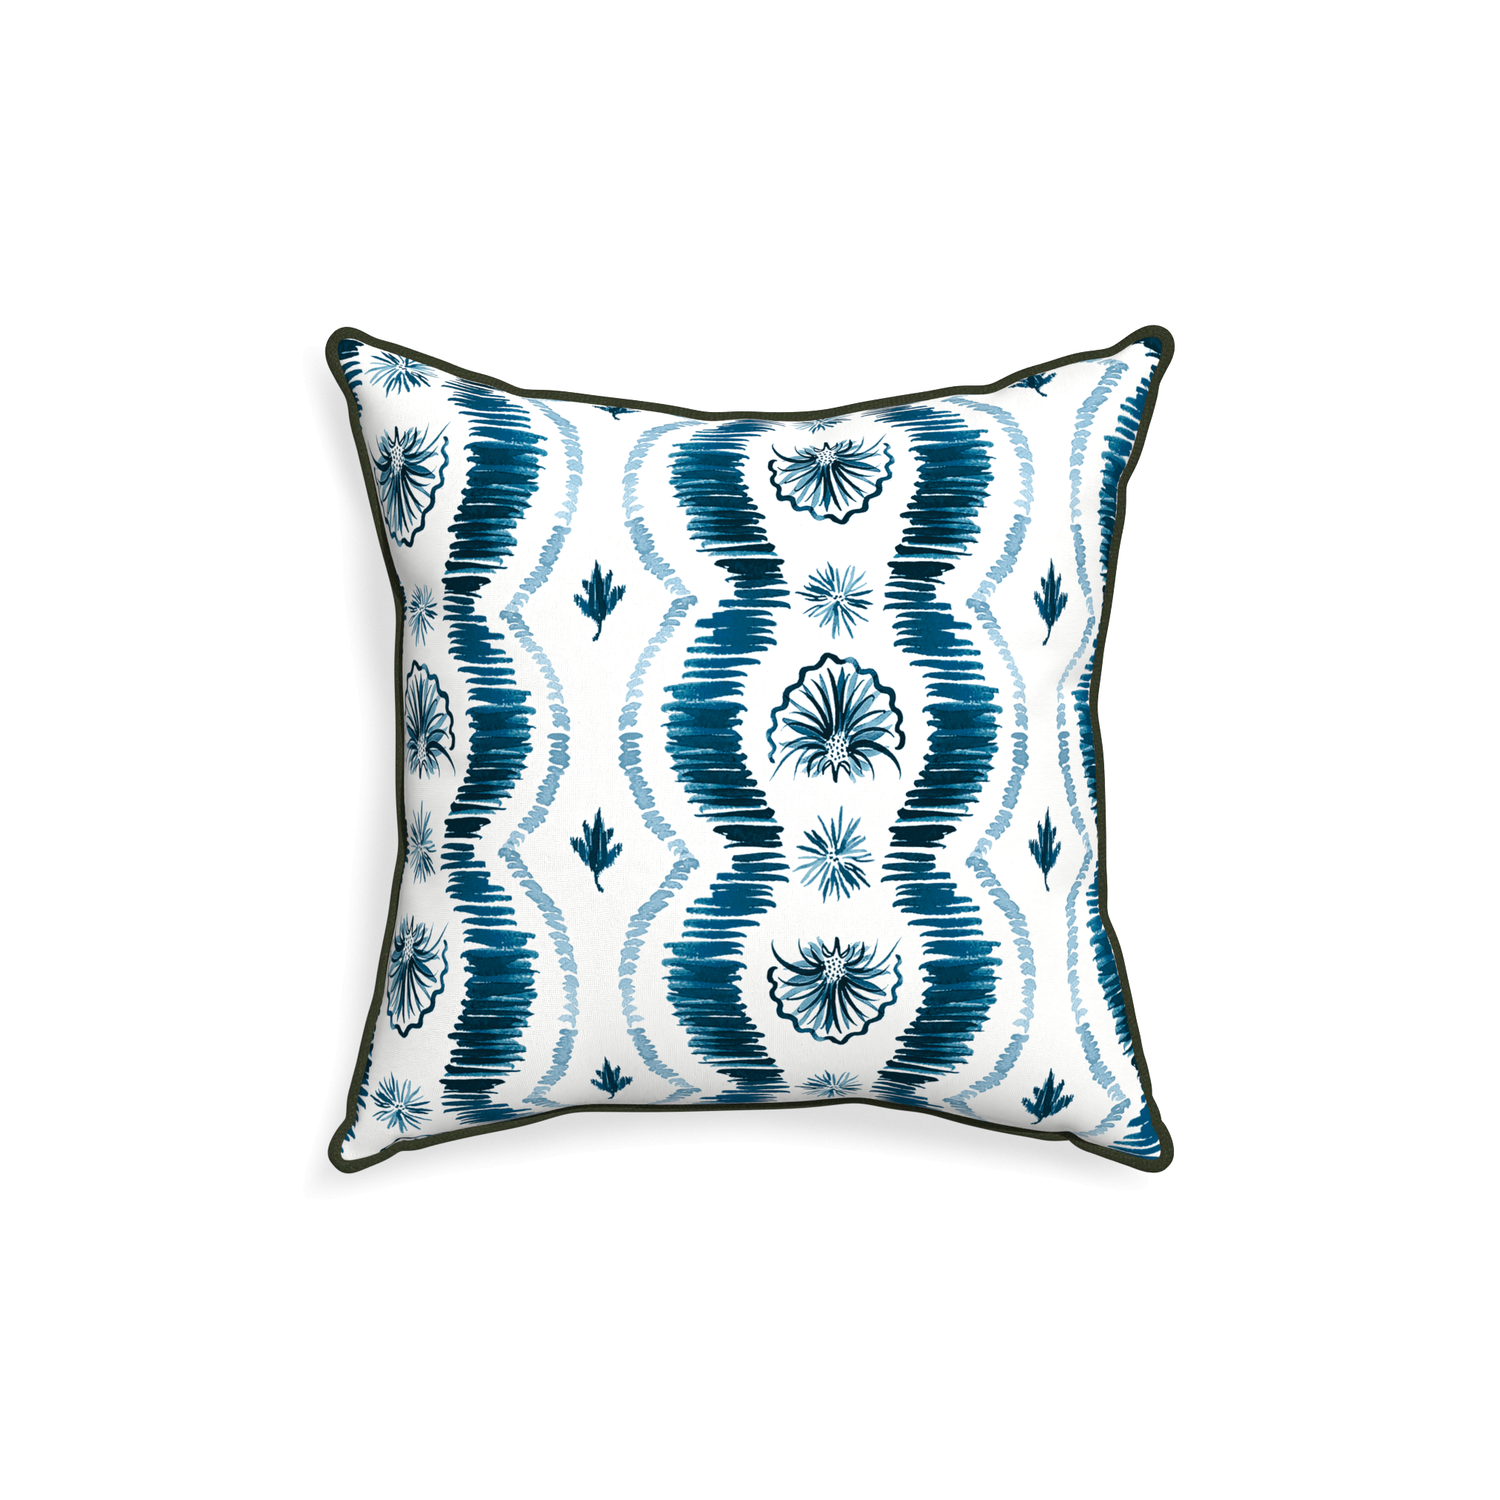 18-square alice custom blue ikatpillow with f piping on white background